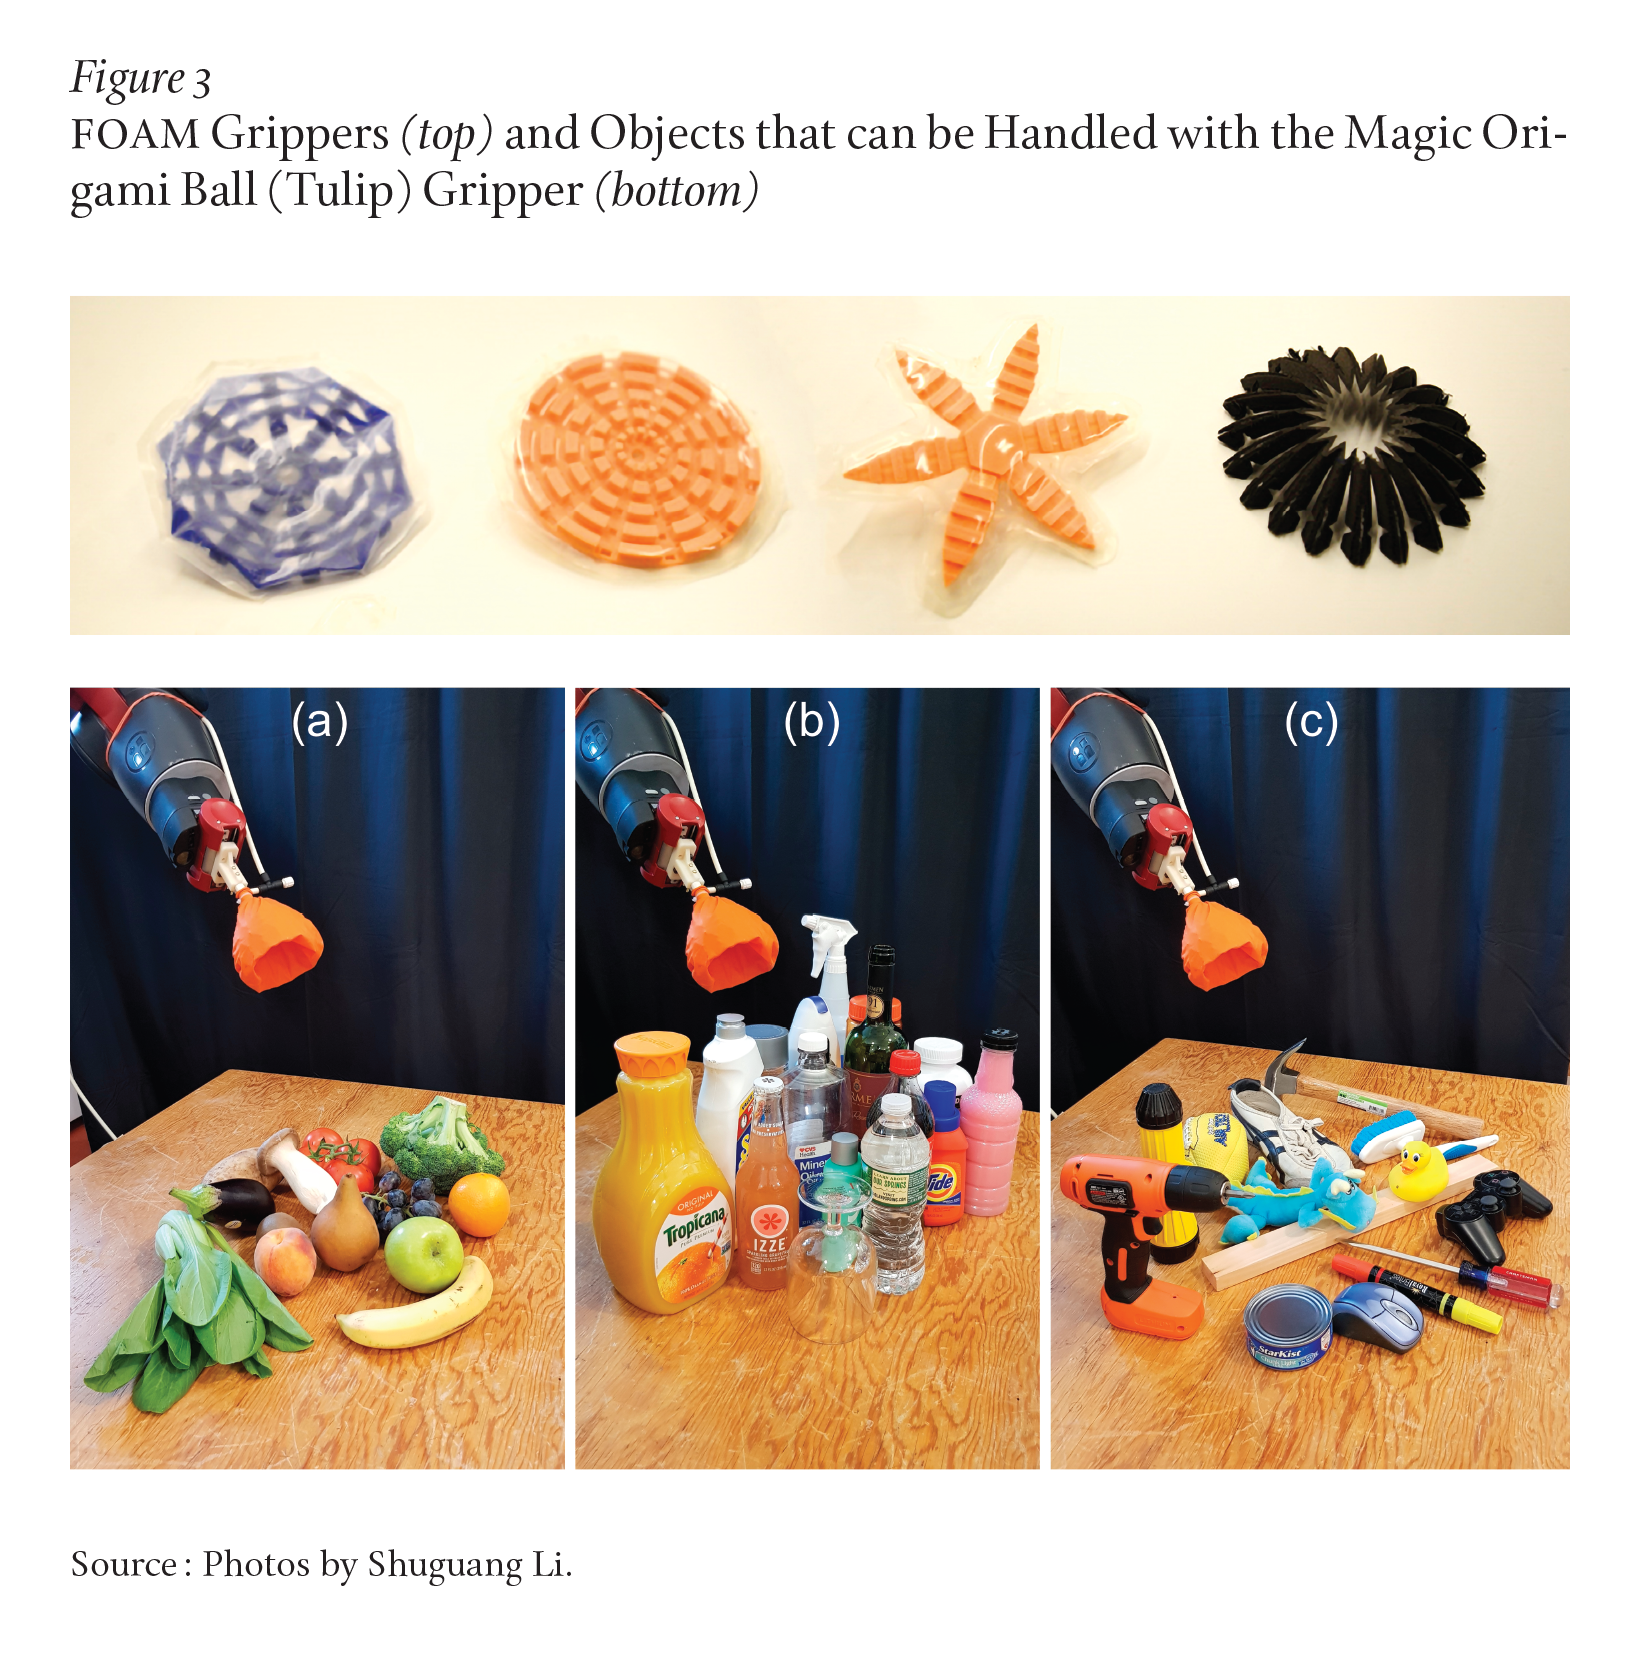 FOAM Grippers and Objects that can be Handled with the Magic Origami Ball (Tulip) Gripper